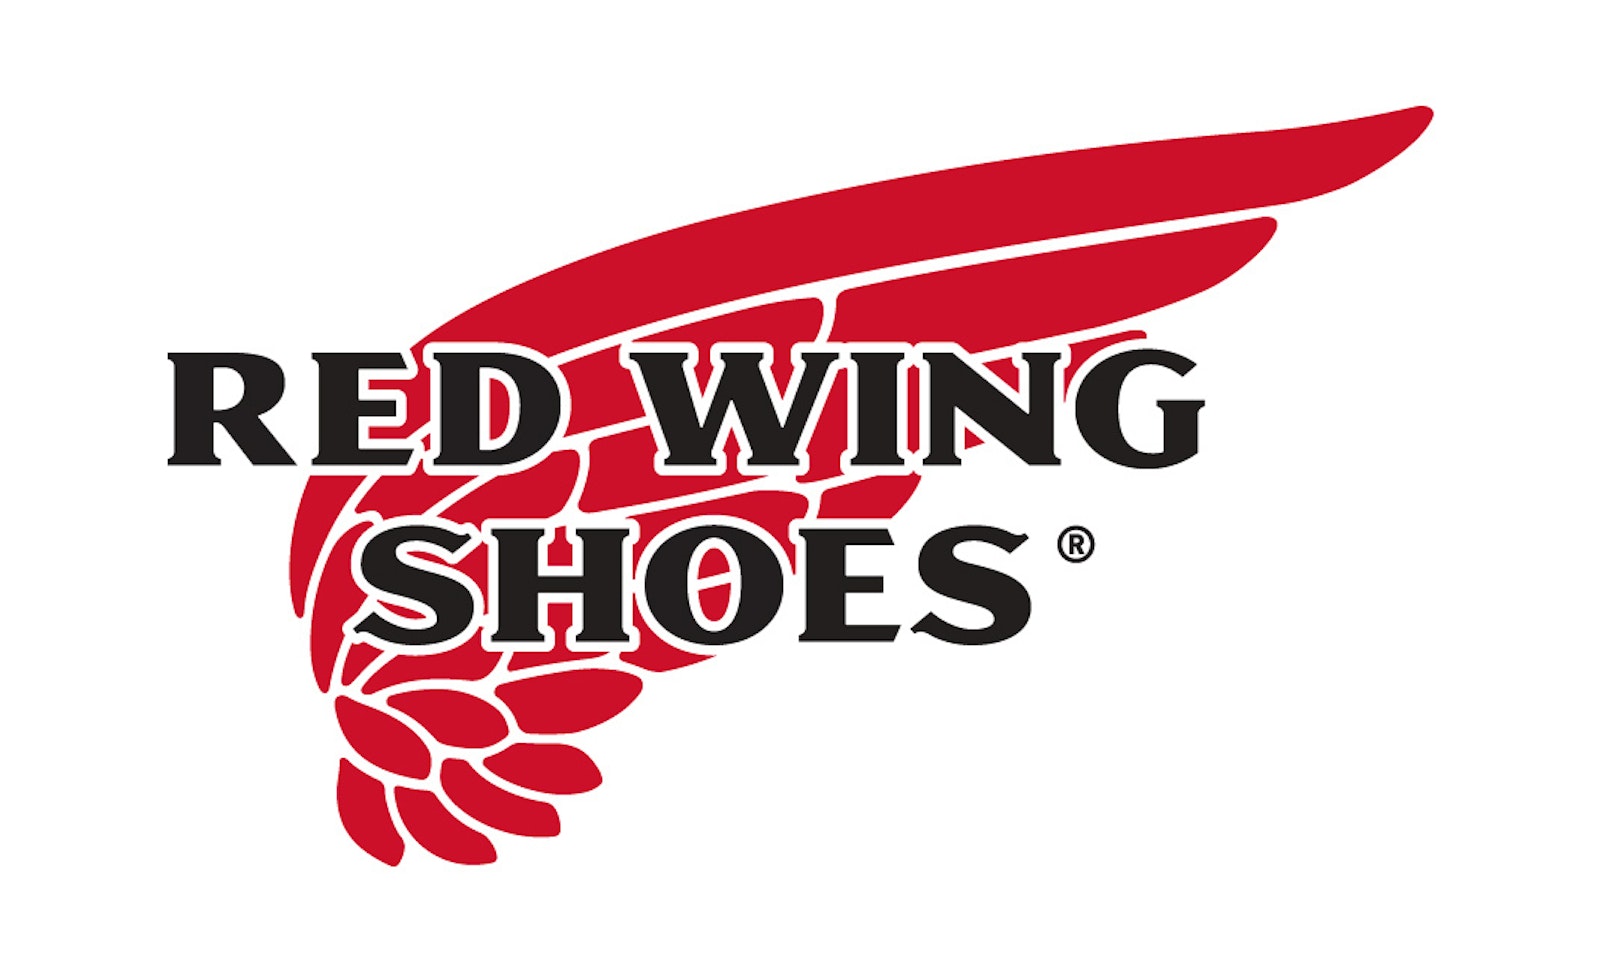 Red Wing Shoes - Minneapolis Strategic Brand Design Agency ...